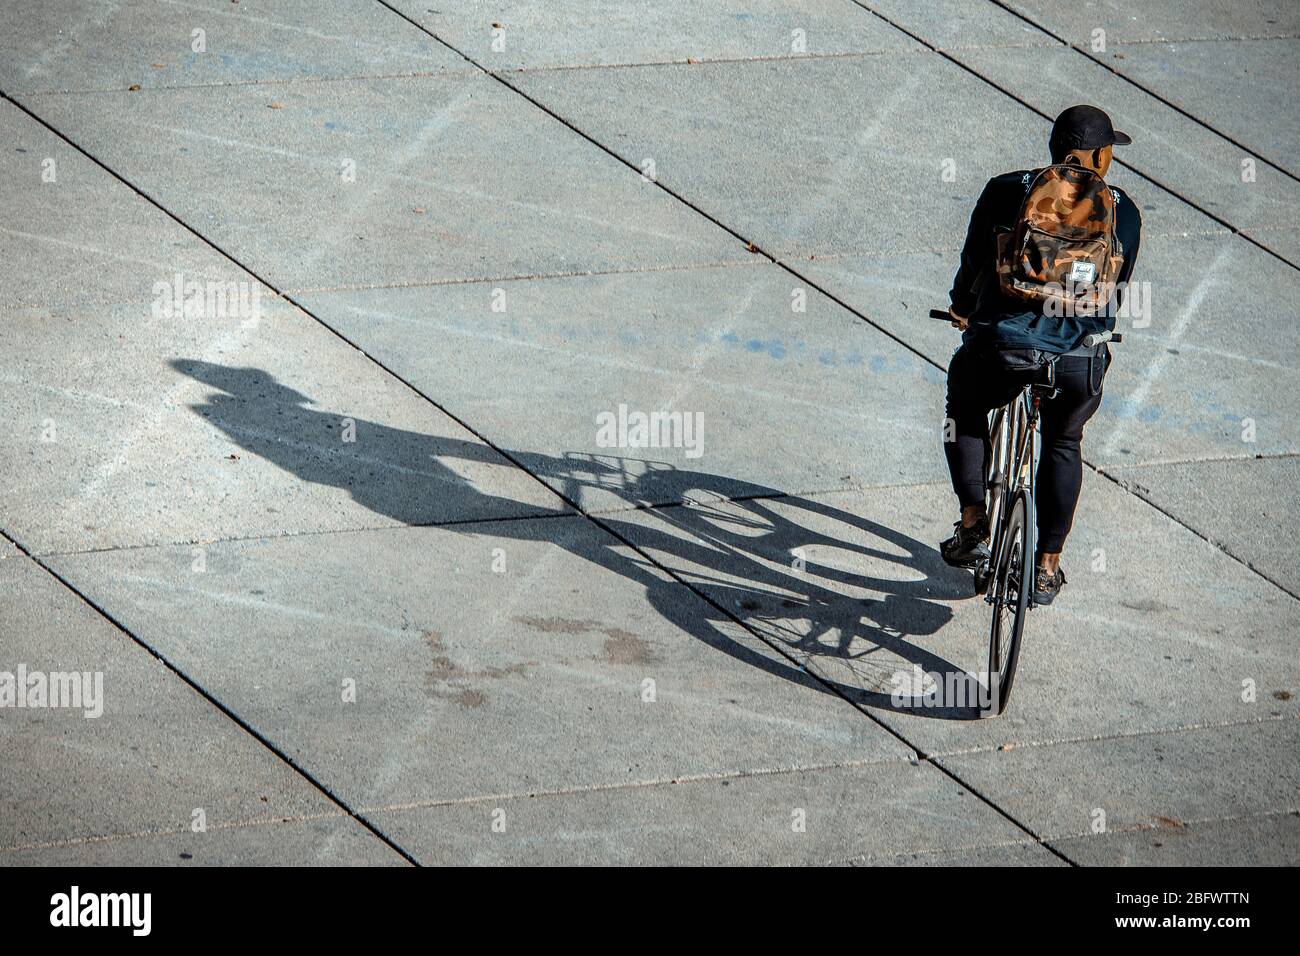 Man riding a bicycle in urban environment Stock Photo